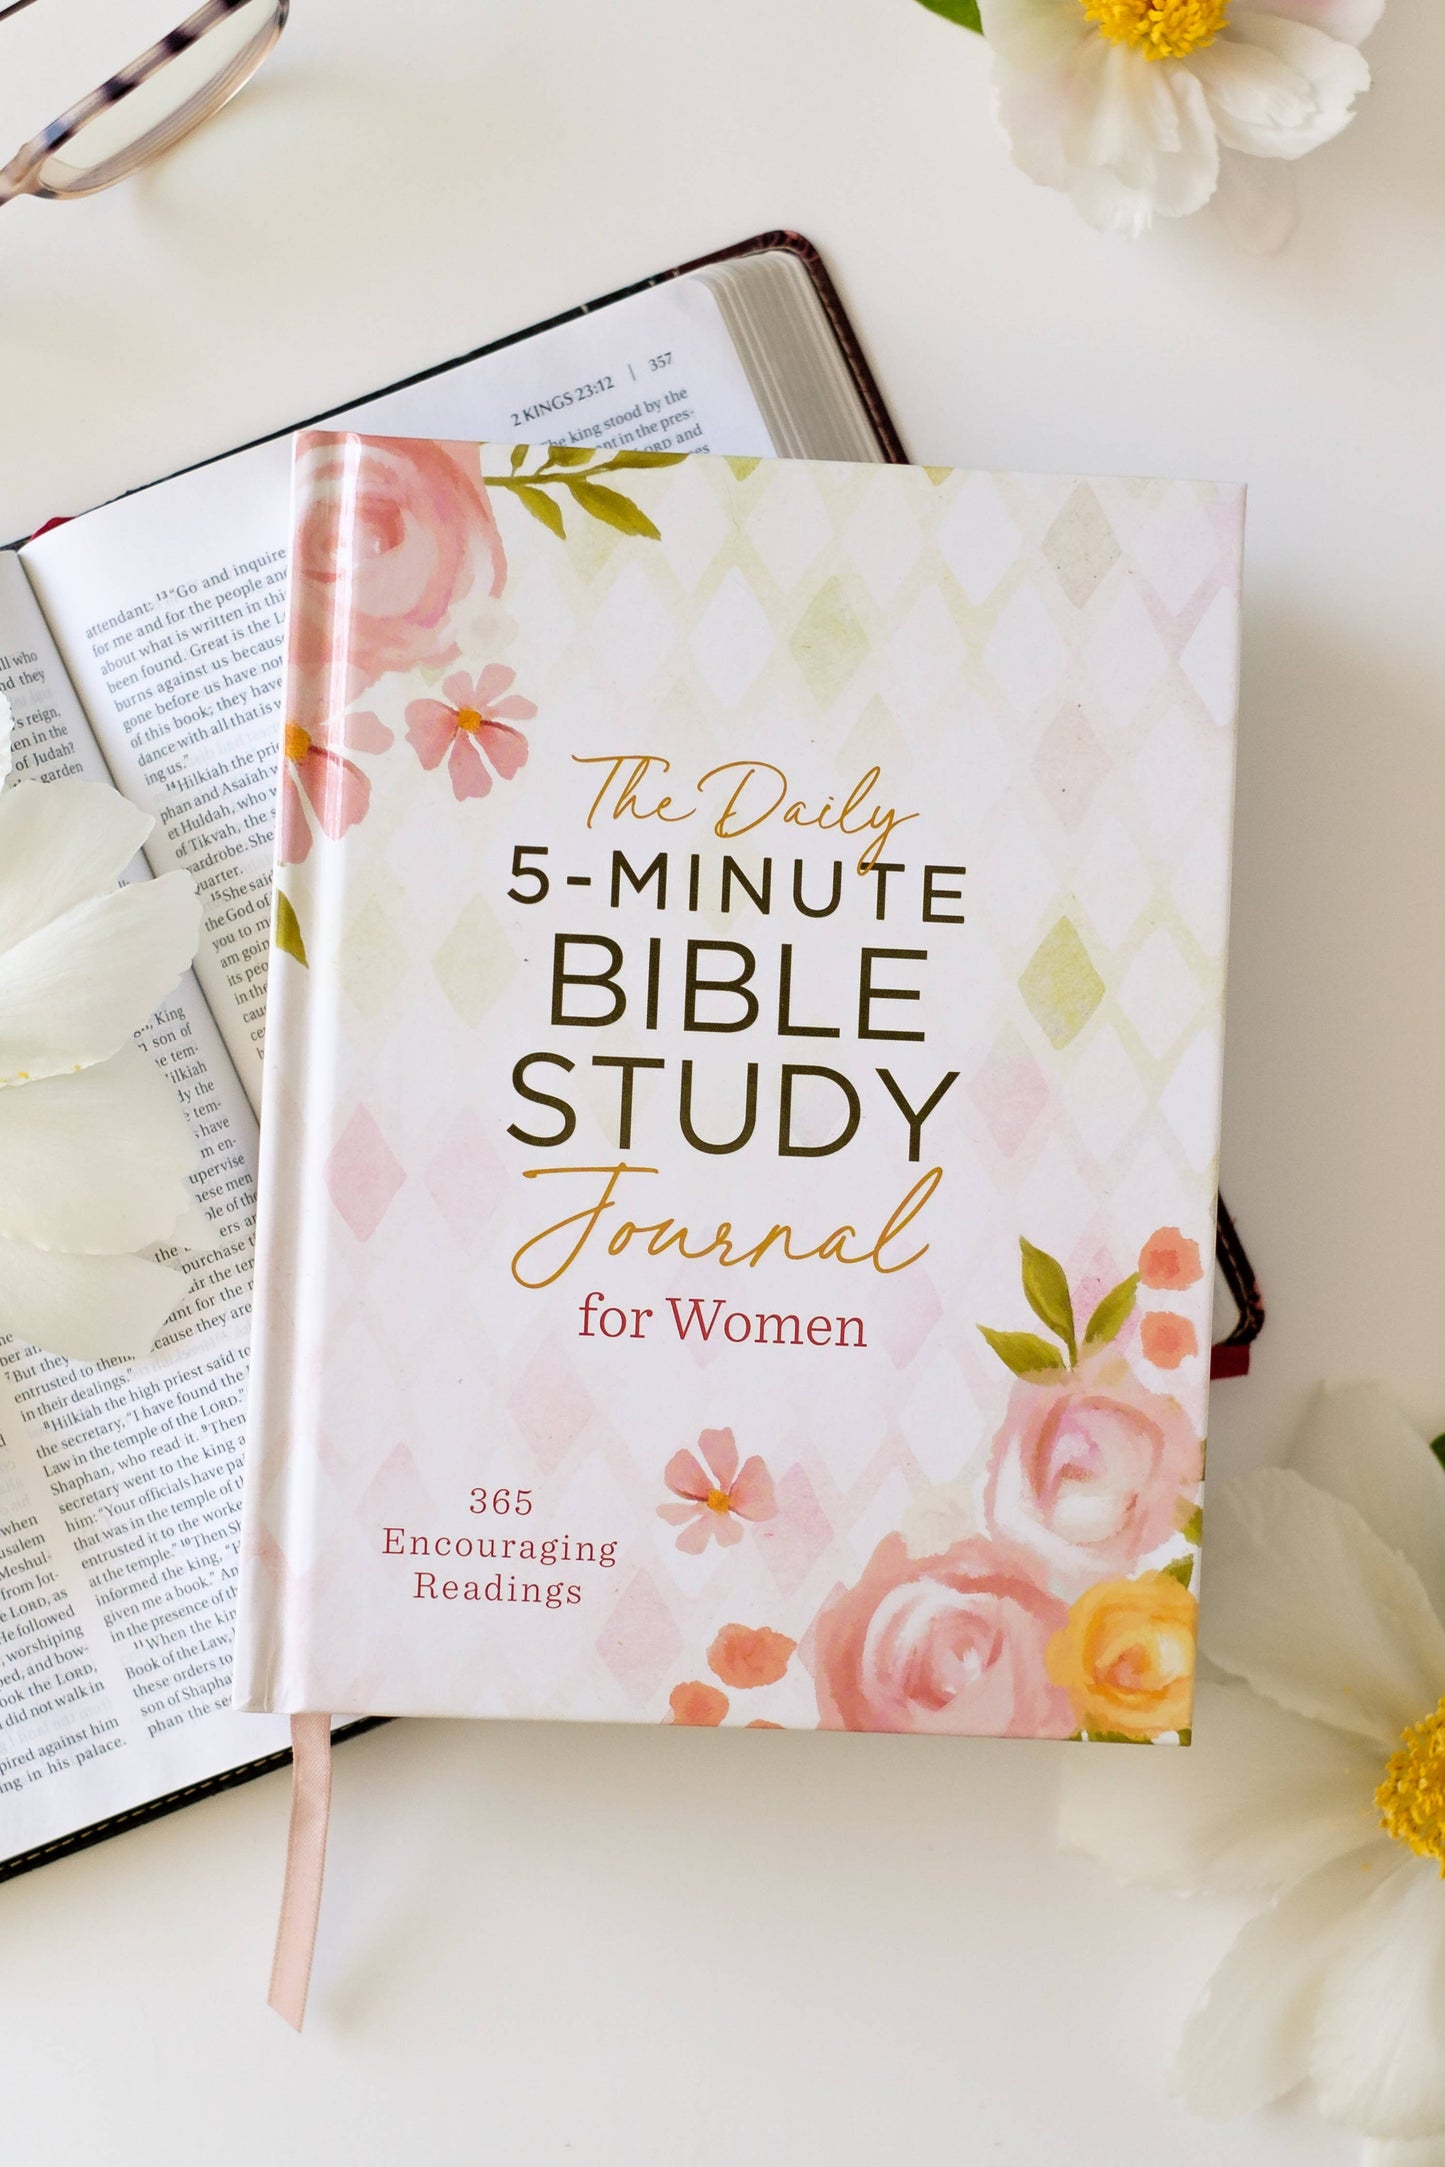 The Bible Journal  A Guided Bible Study Journal for Prayer and Journaling